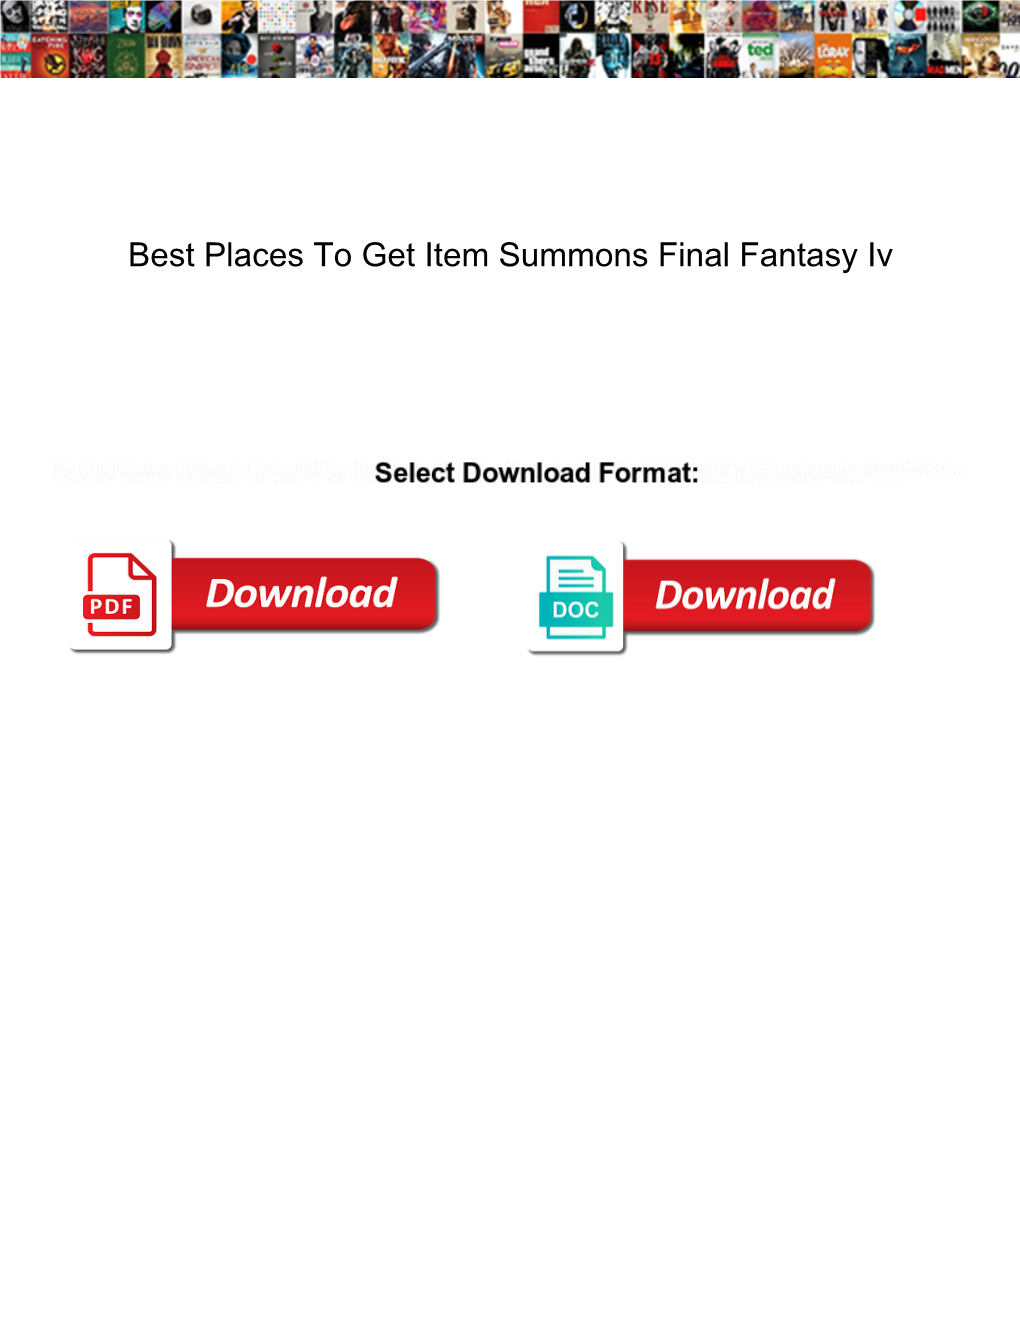 Best Places to Get Item Summons Final Fantasy Iv